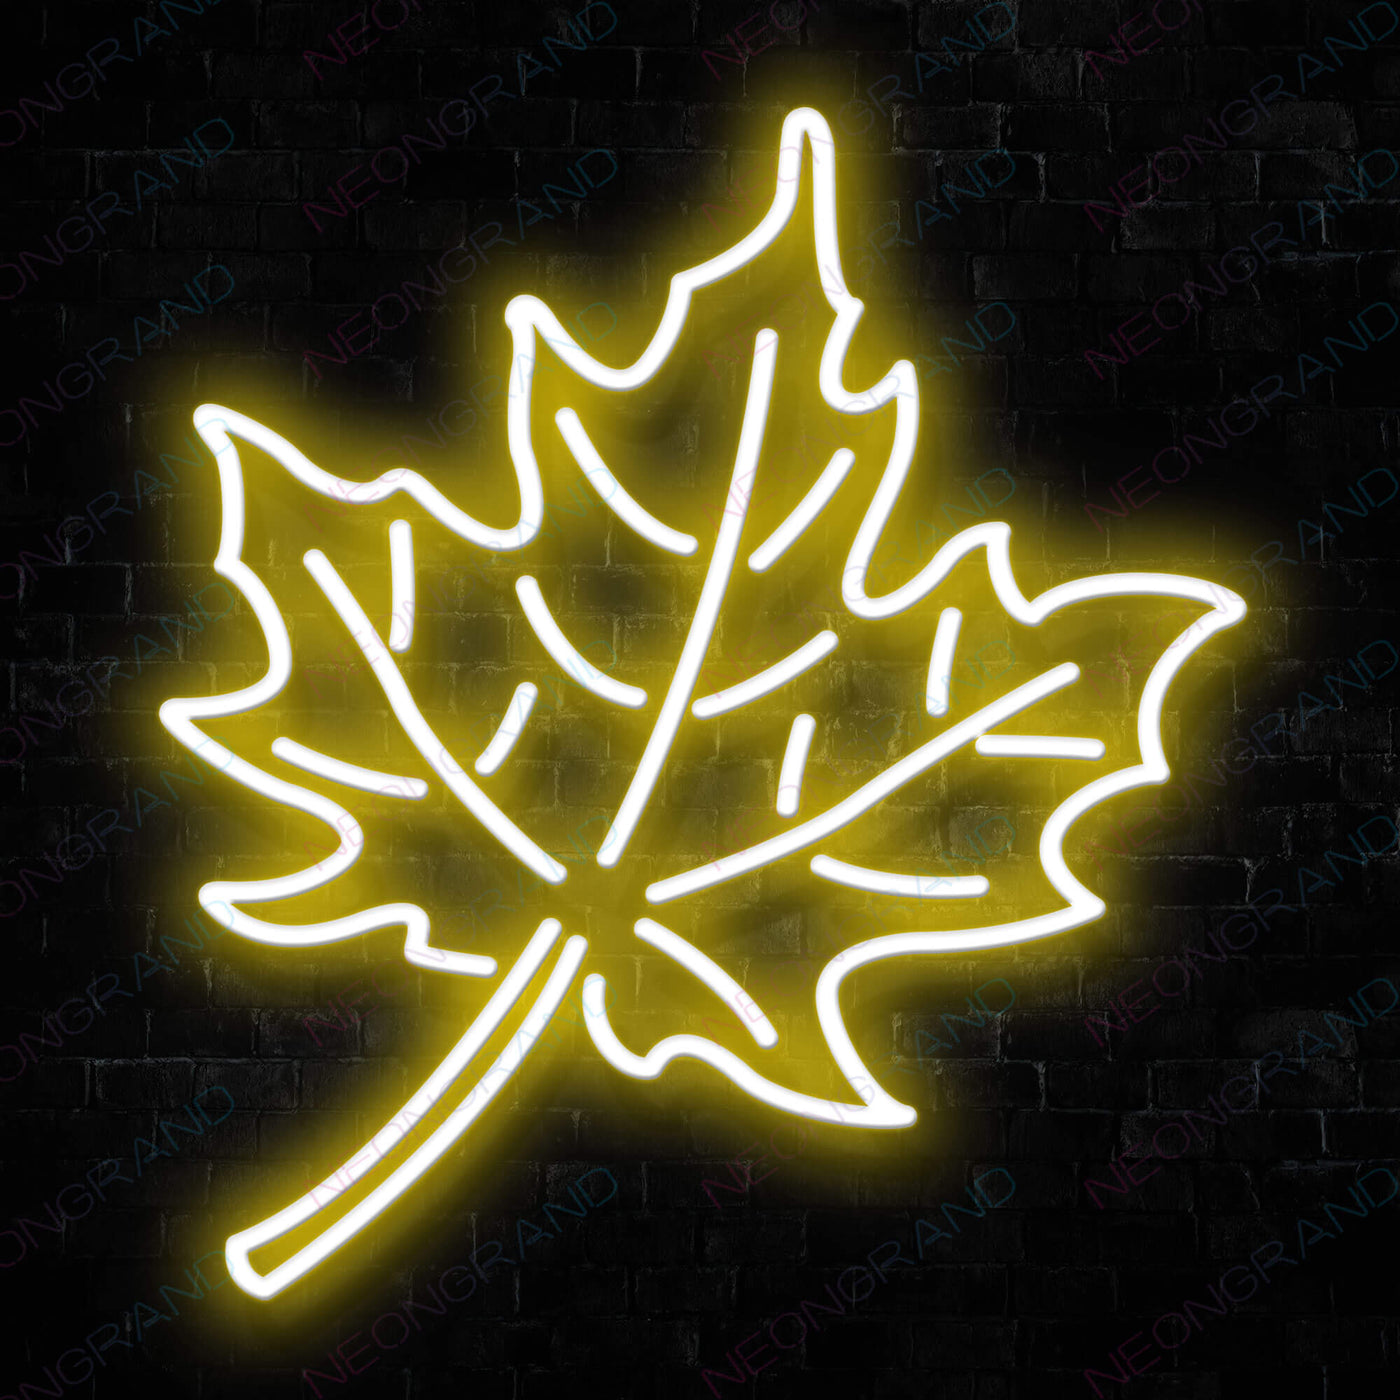 Aesthetic Neon Leaves Sign Led Light yellow